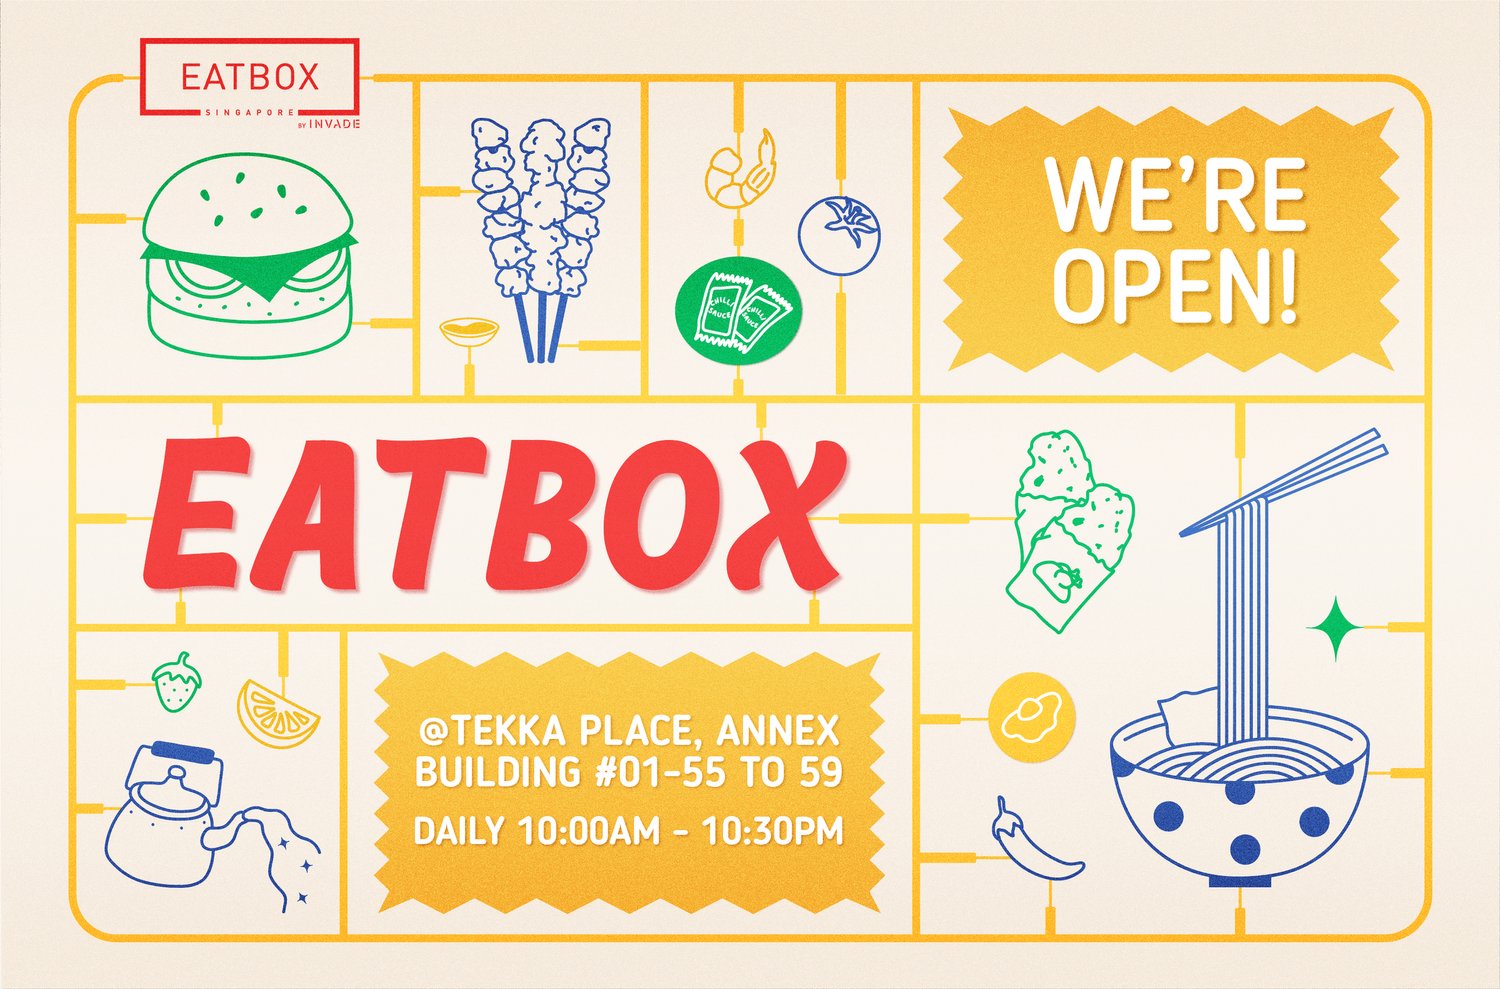 8 Halal Makan Options at Eatbox Singapore! featured image